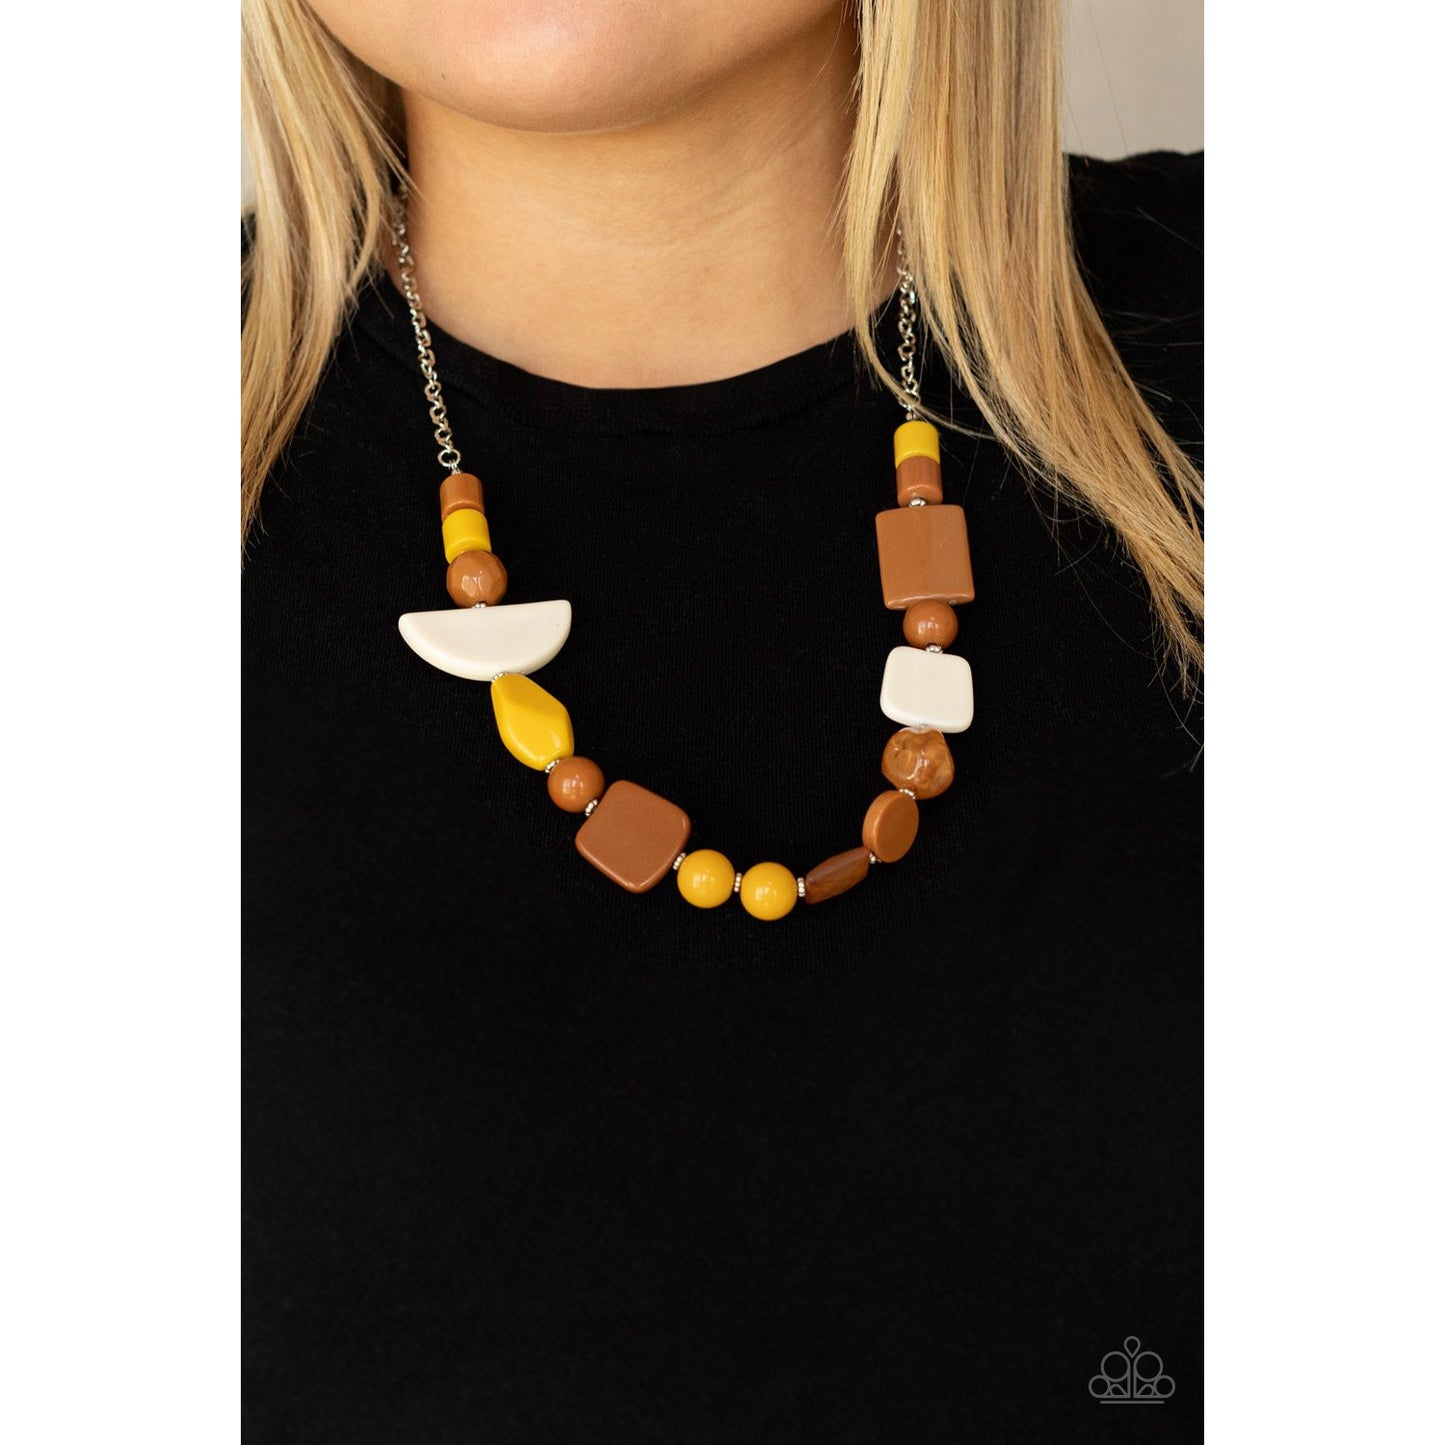 Tranquil Trendsetter - Yellow Necklace - Paparazzi Accessories - GlaMarous Titi Jewels